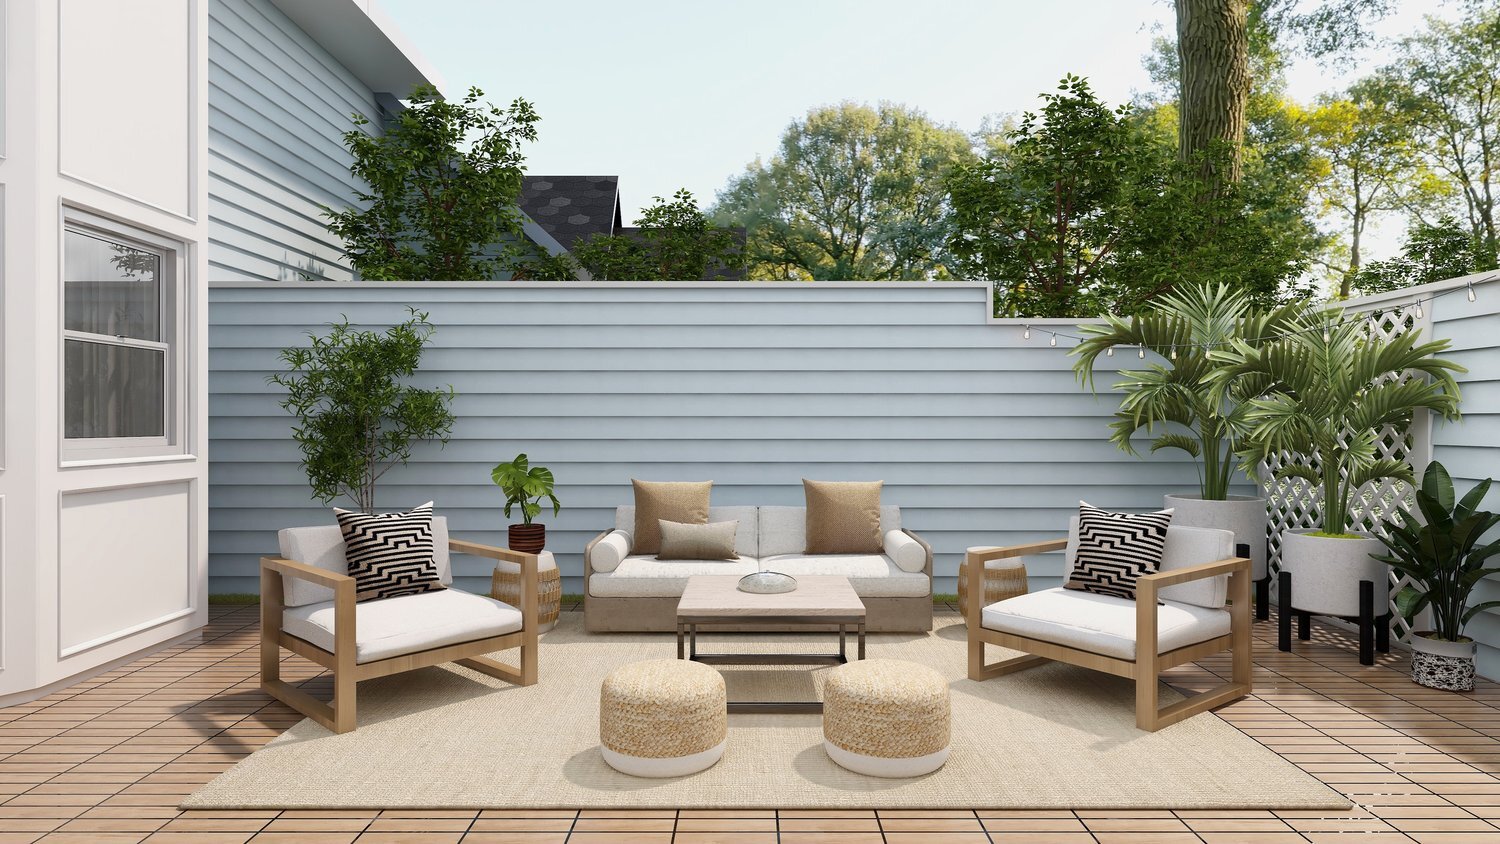 Rendering of a modern deck with patio furniture